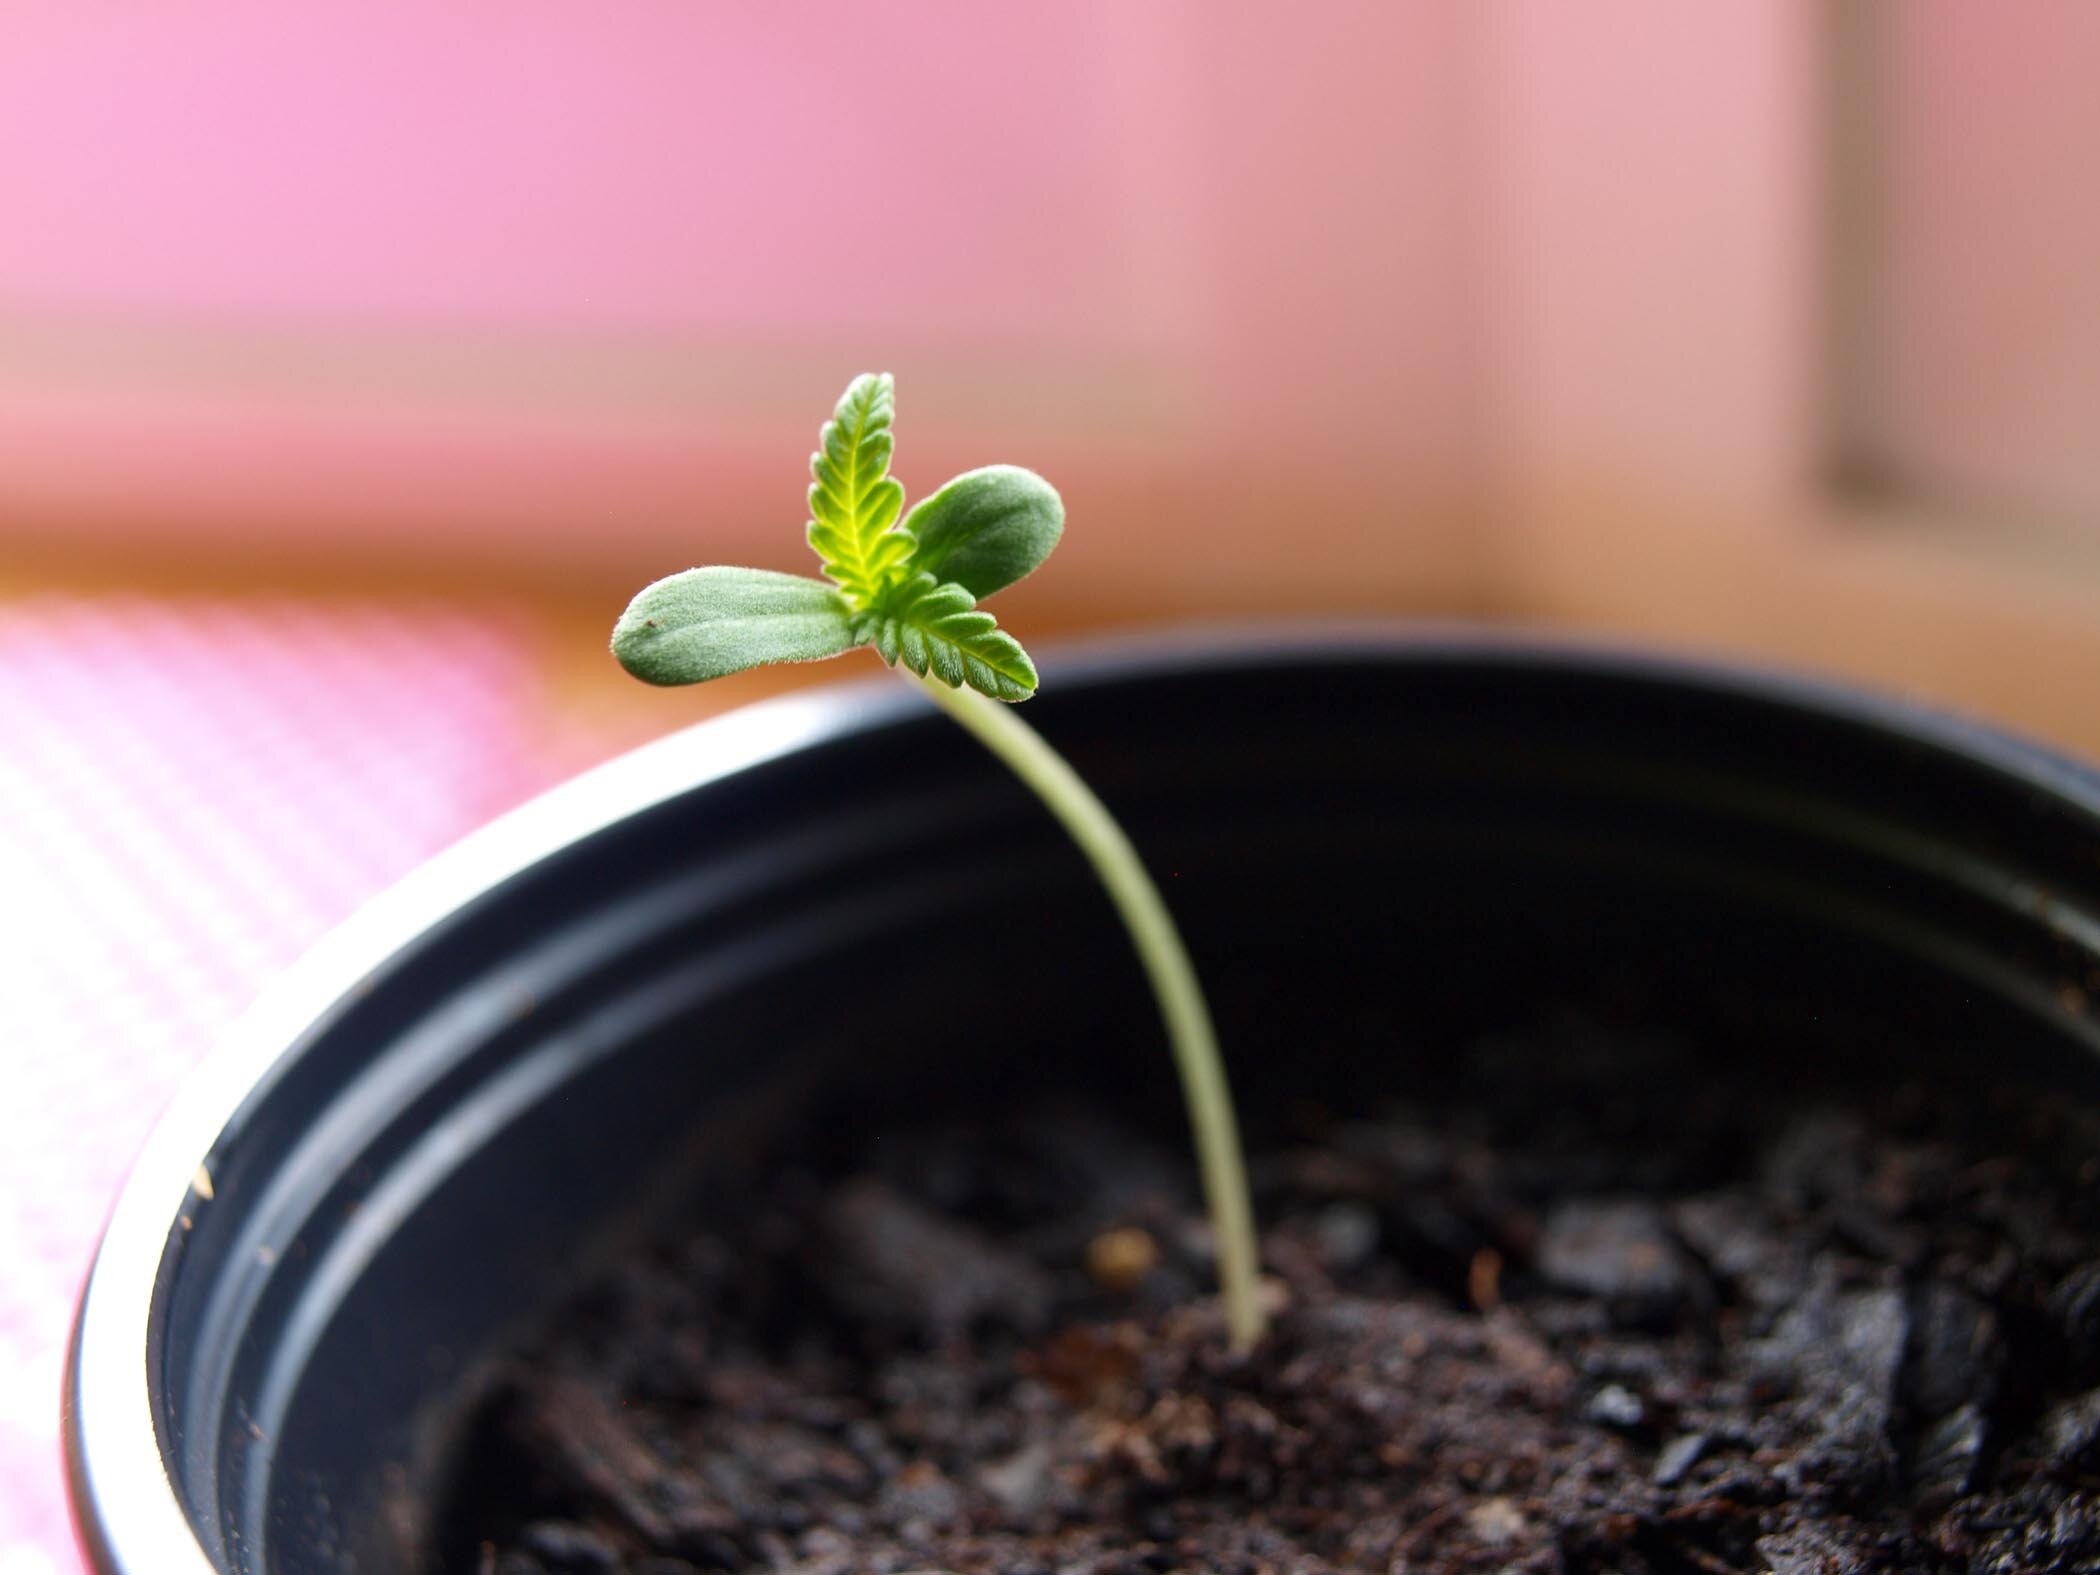 photo showing a cannabis seedling of the Indica strain